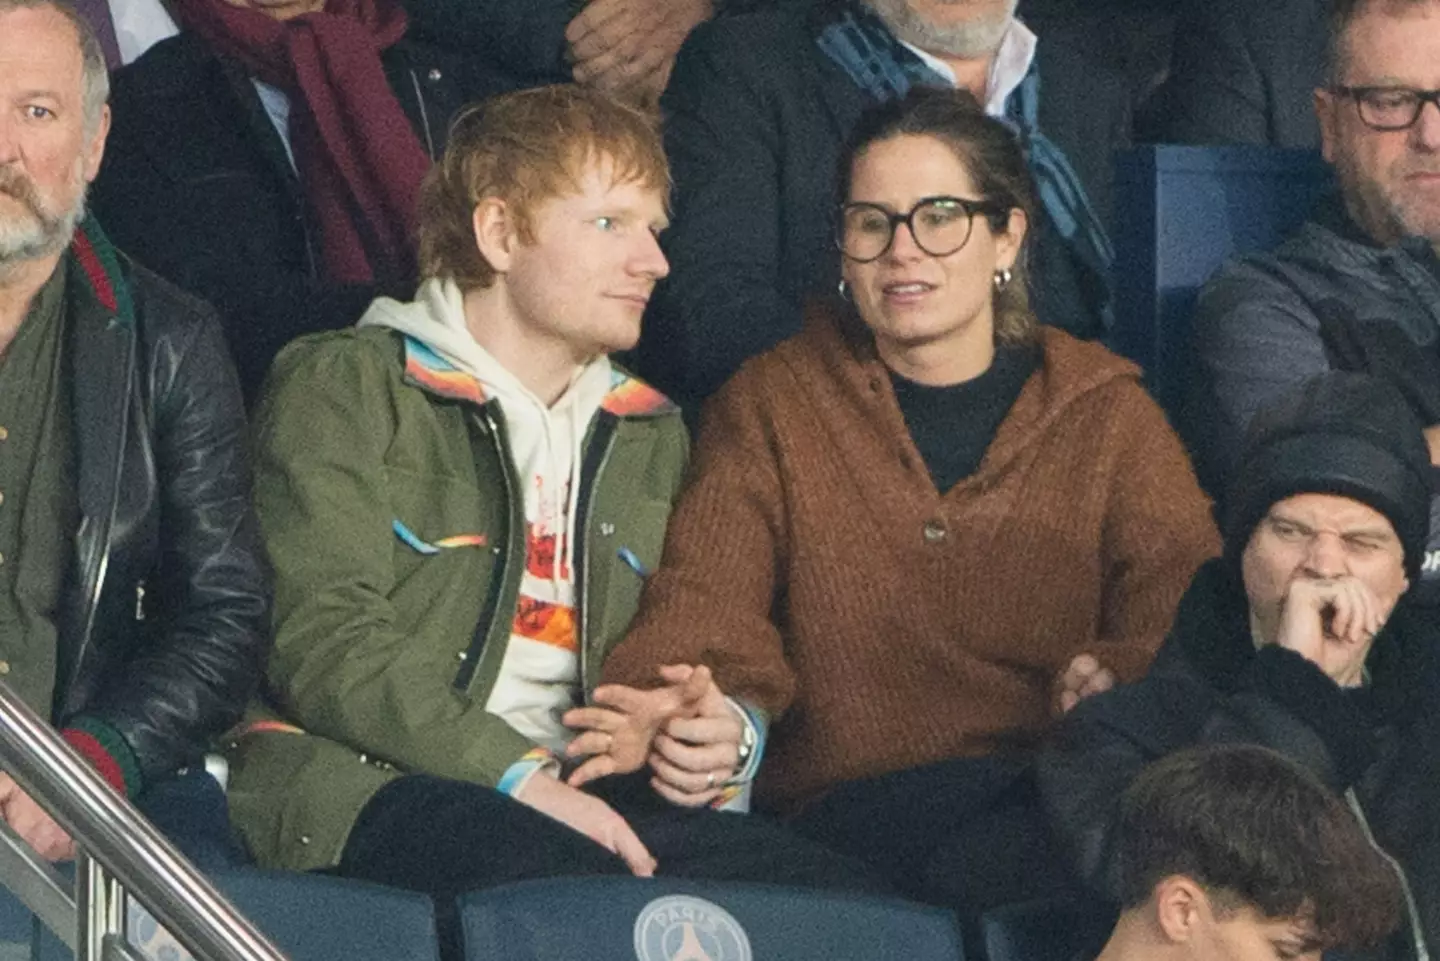 Sheeran and Seaborn married in 2019.